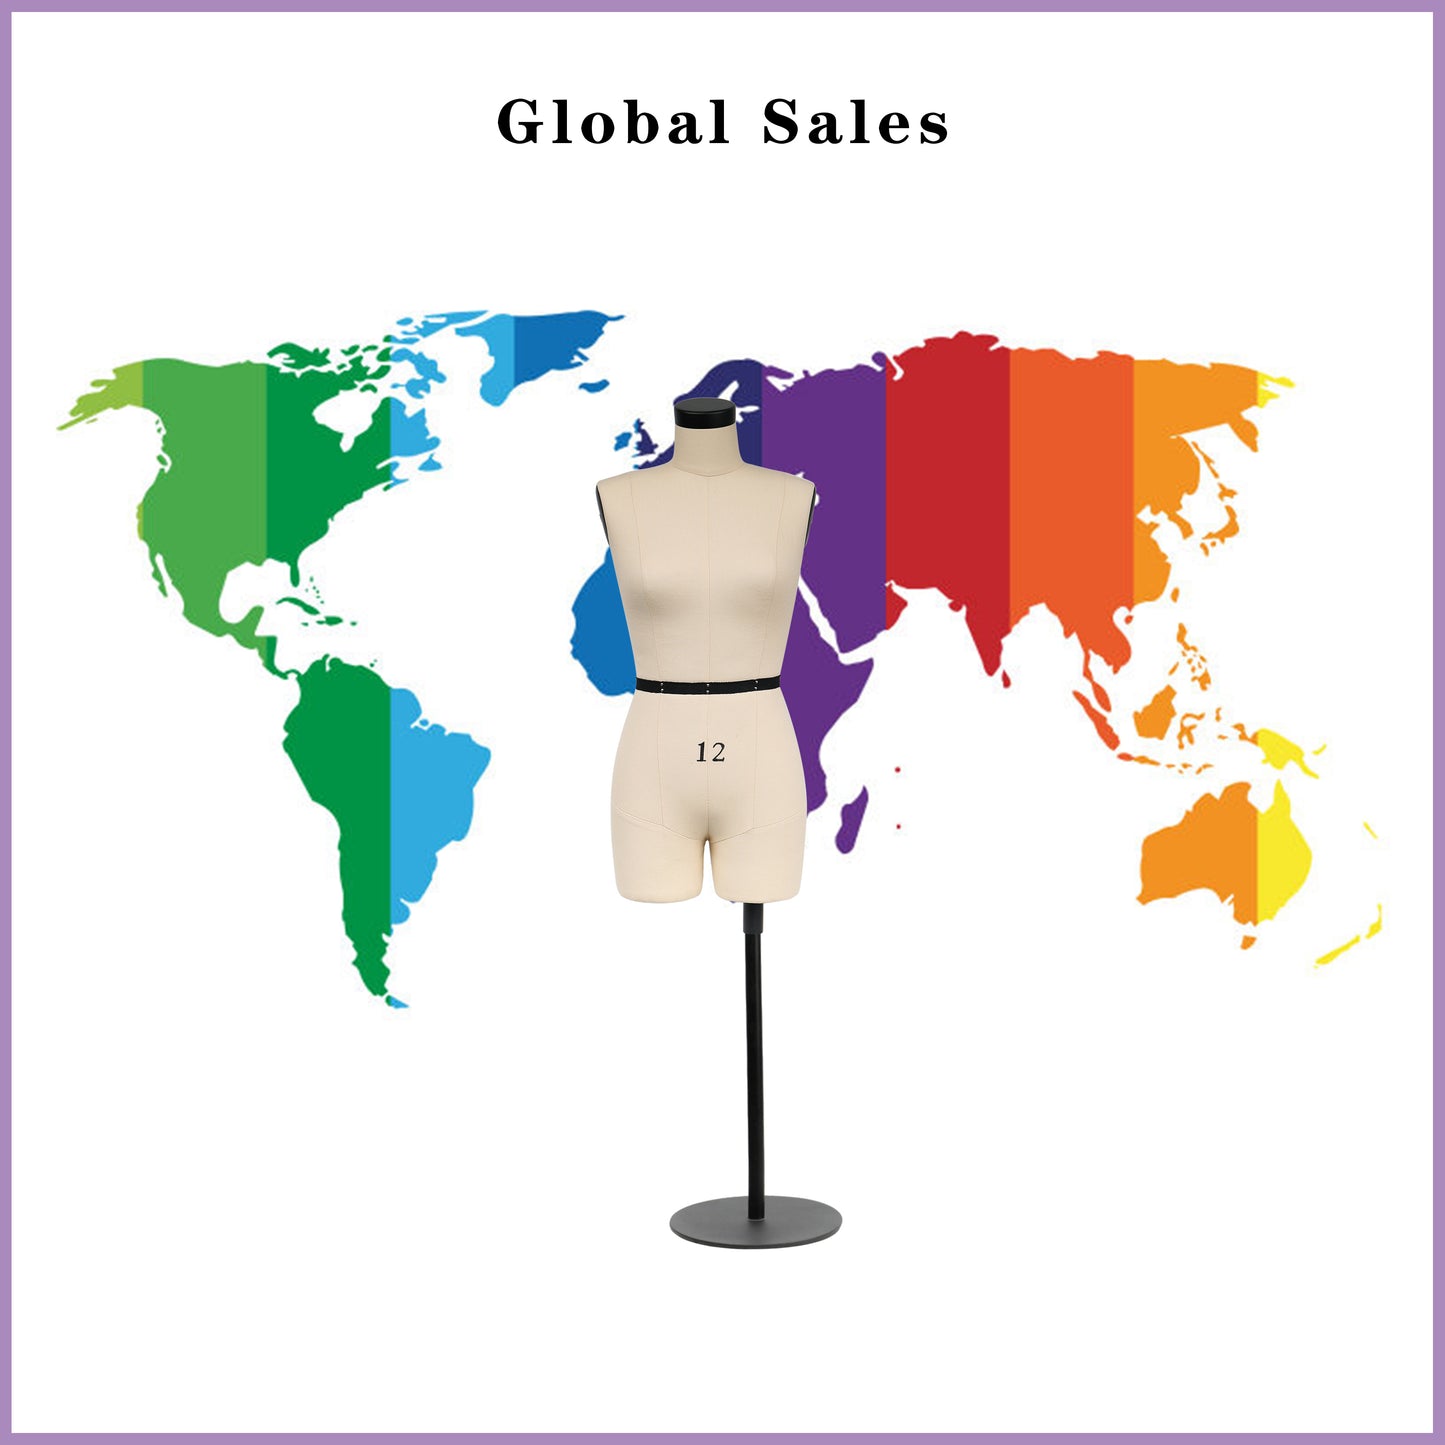 Jelimate Size 12 Female Half Scale Dress Form For Sewing,Mini Tailor Mannequin for Fashion Designer Pattern Making,Miniature Women Sewing Mannequin for Fashion School Draping Mannequin